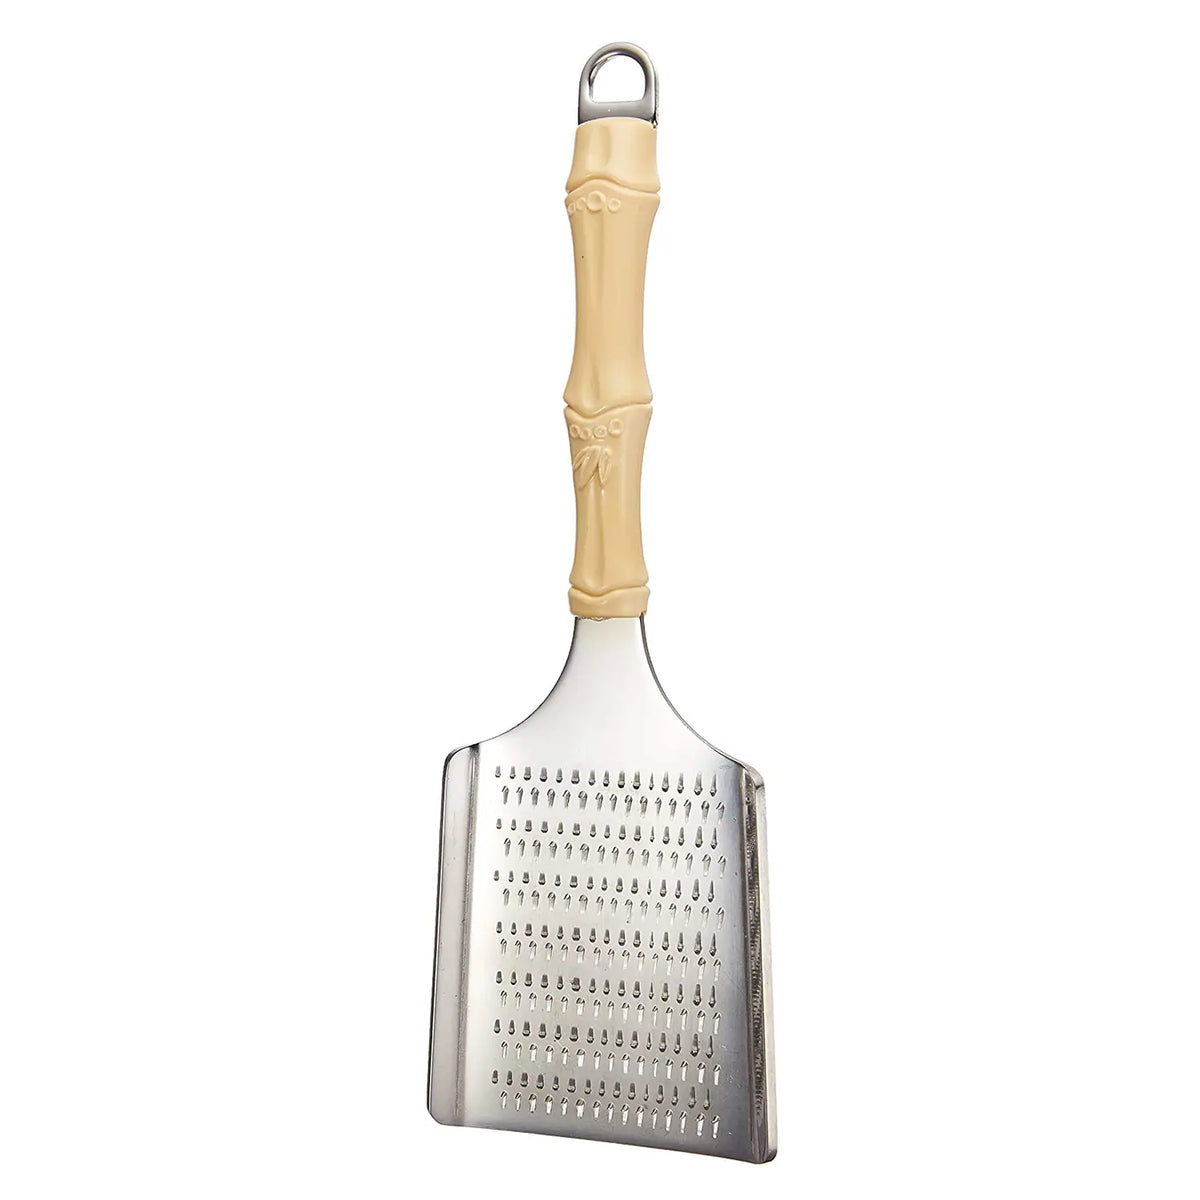 Wada Corporation Yuhana Stainless Steel Grater